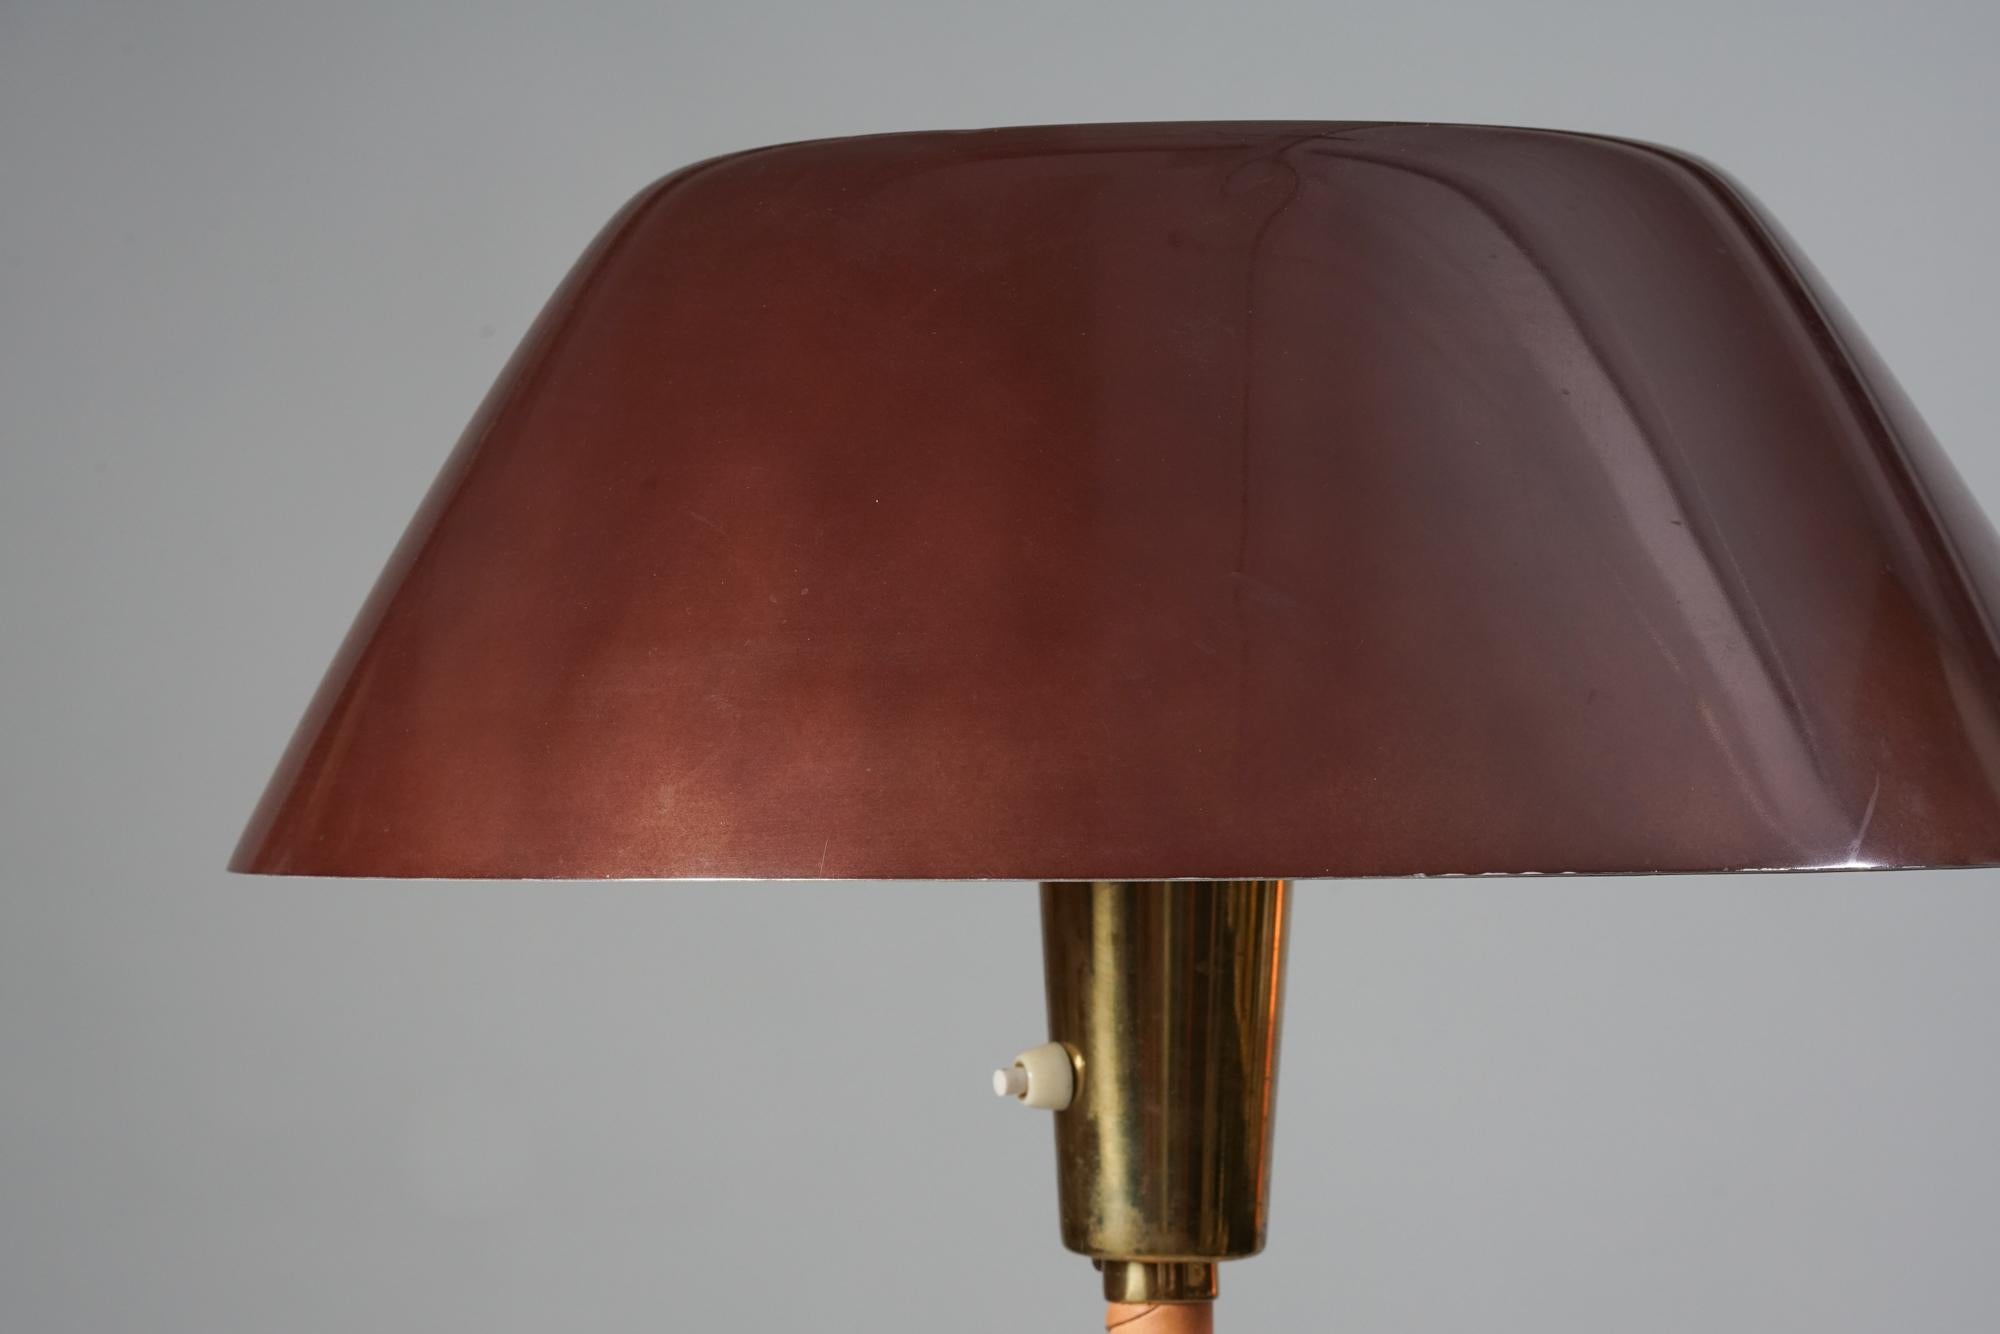  Senator Floor Lamp by Lisa Johansson-Pape for Orno, 1950s In Good Condition For Sale In Helsinki, FI